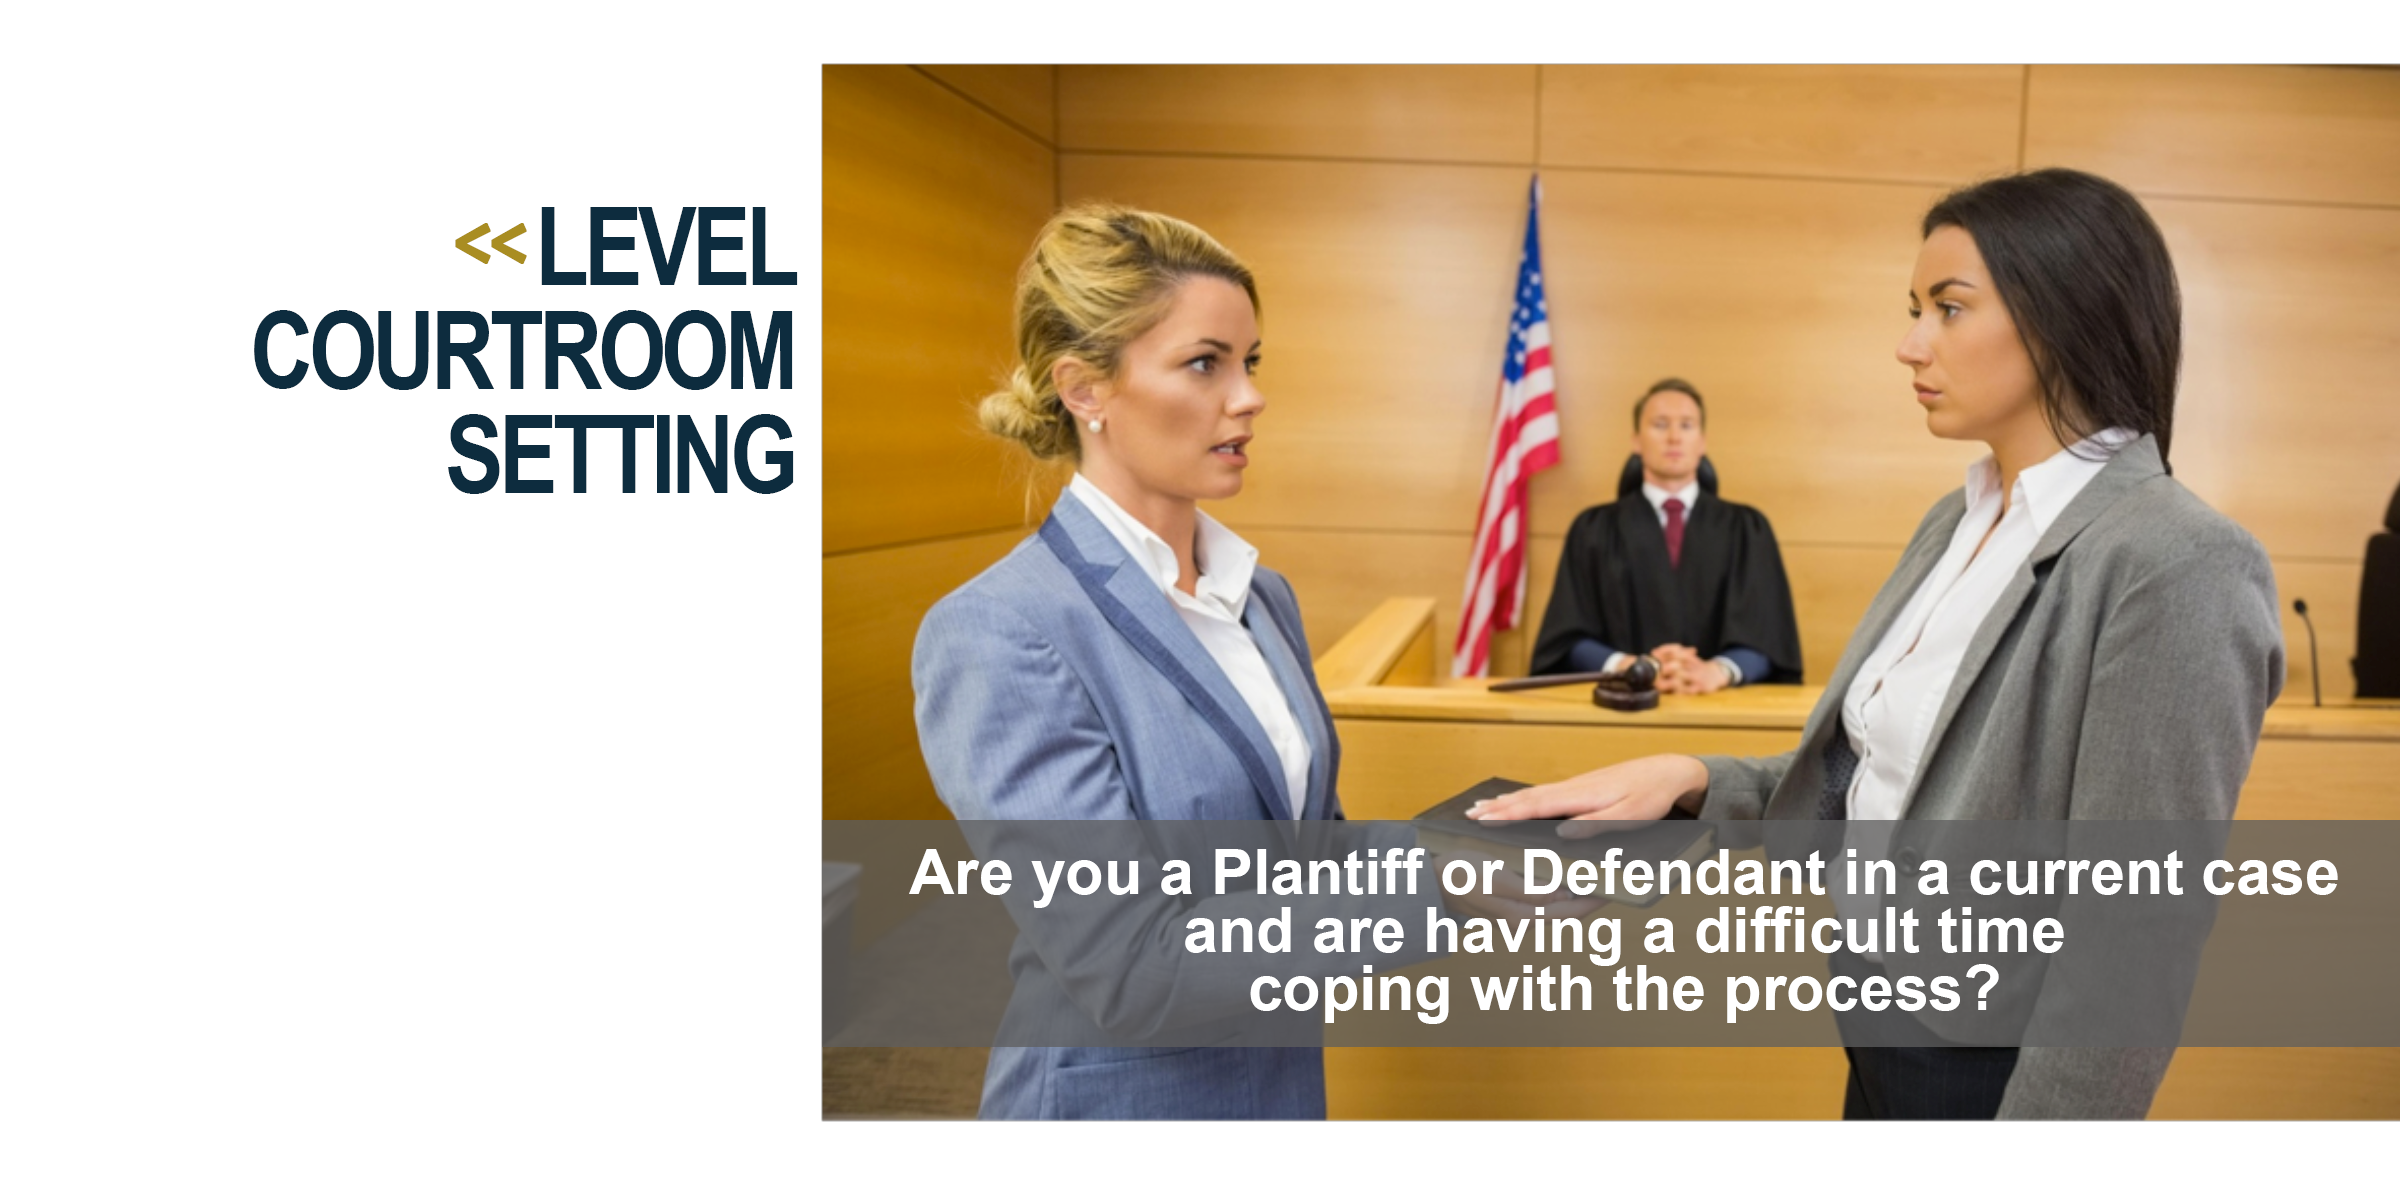 Are you a plaintiff or a defendant in a current case and are having a difficult time coping with the process?